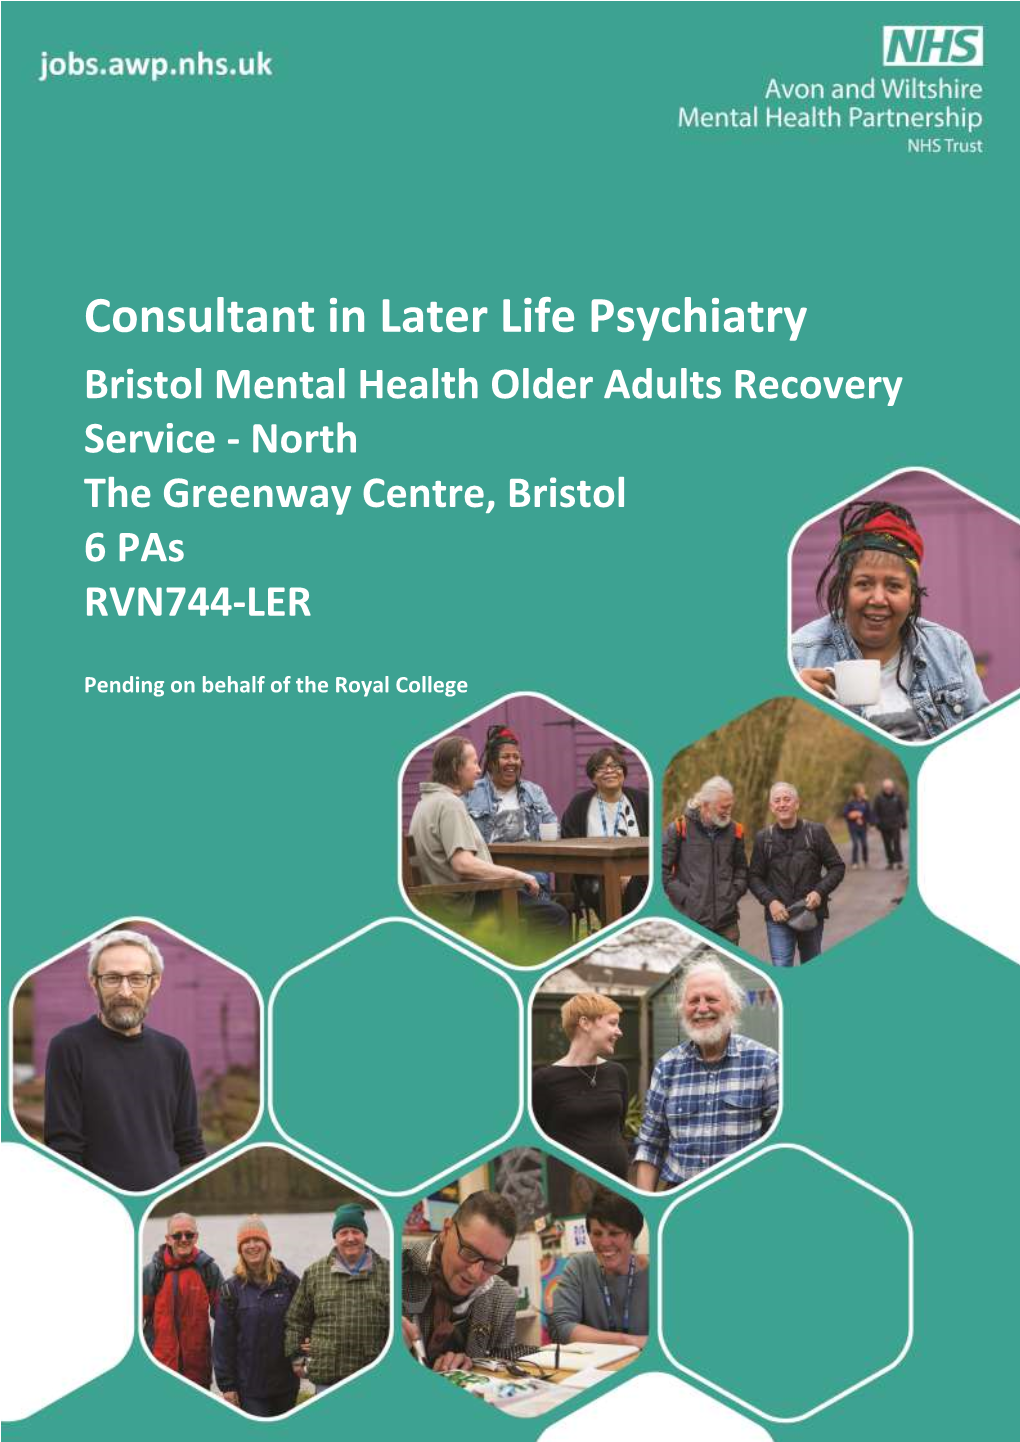 Consultant in Later Life Psychiatry Bristol Mental Health Older Adults Recovery Service - North the Greenway Centre, Bristol 6 Pas RVN744-LER